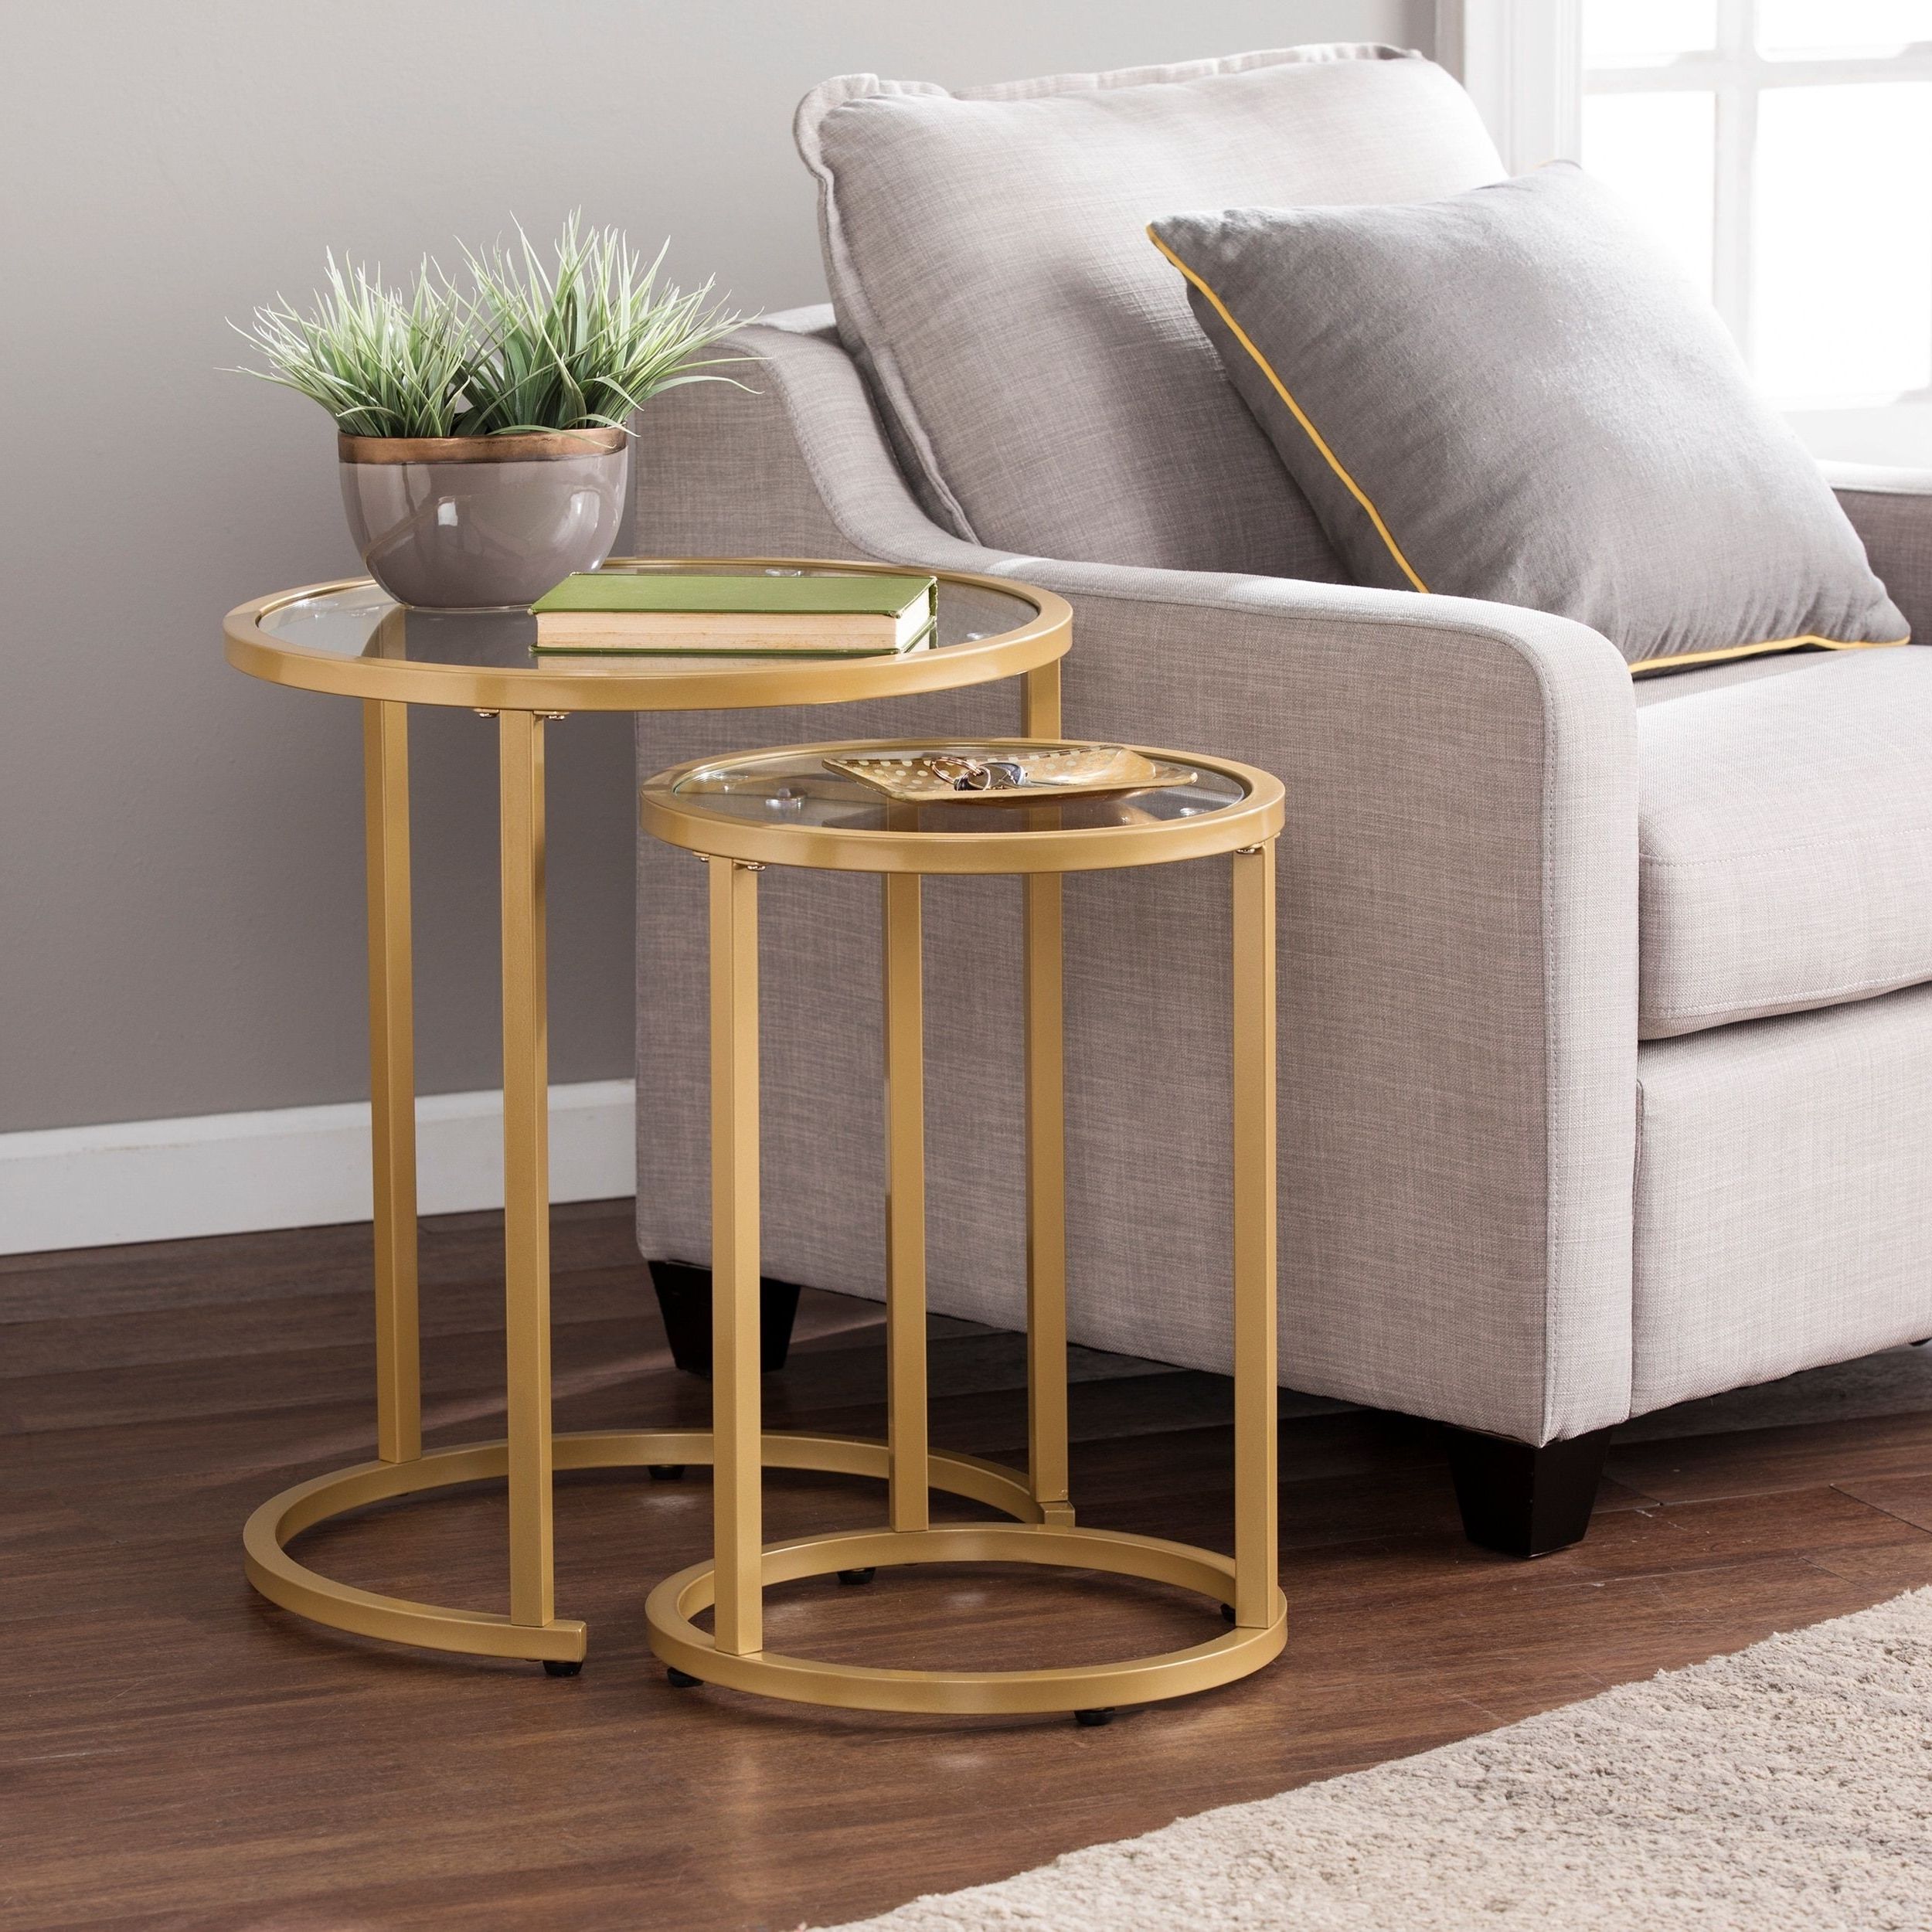 Silver Orchid Grant Glam Nesting Side Table 2pc Set – Gold In Favorite Silver Orchid Price Glass Coffee Tables (Gallery 19 of 20)